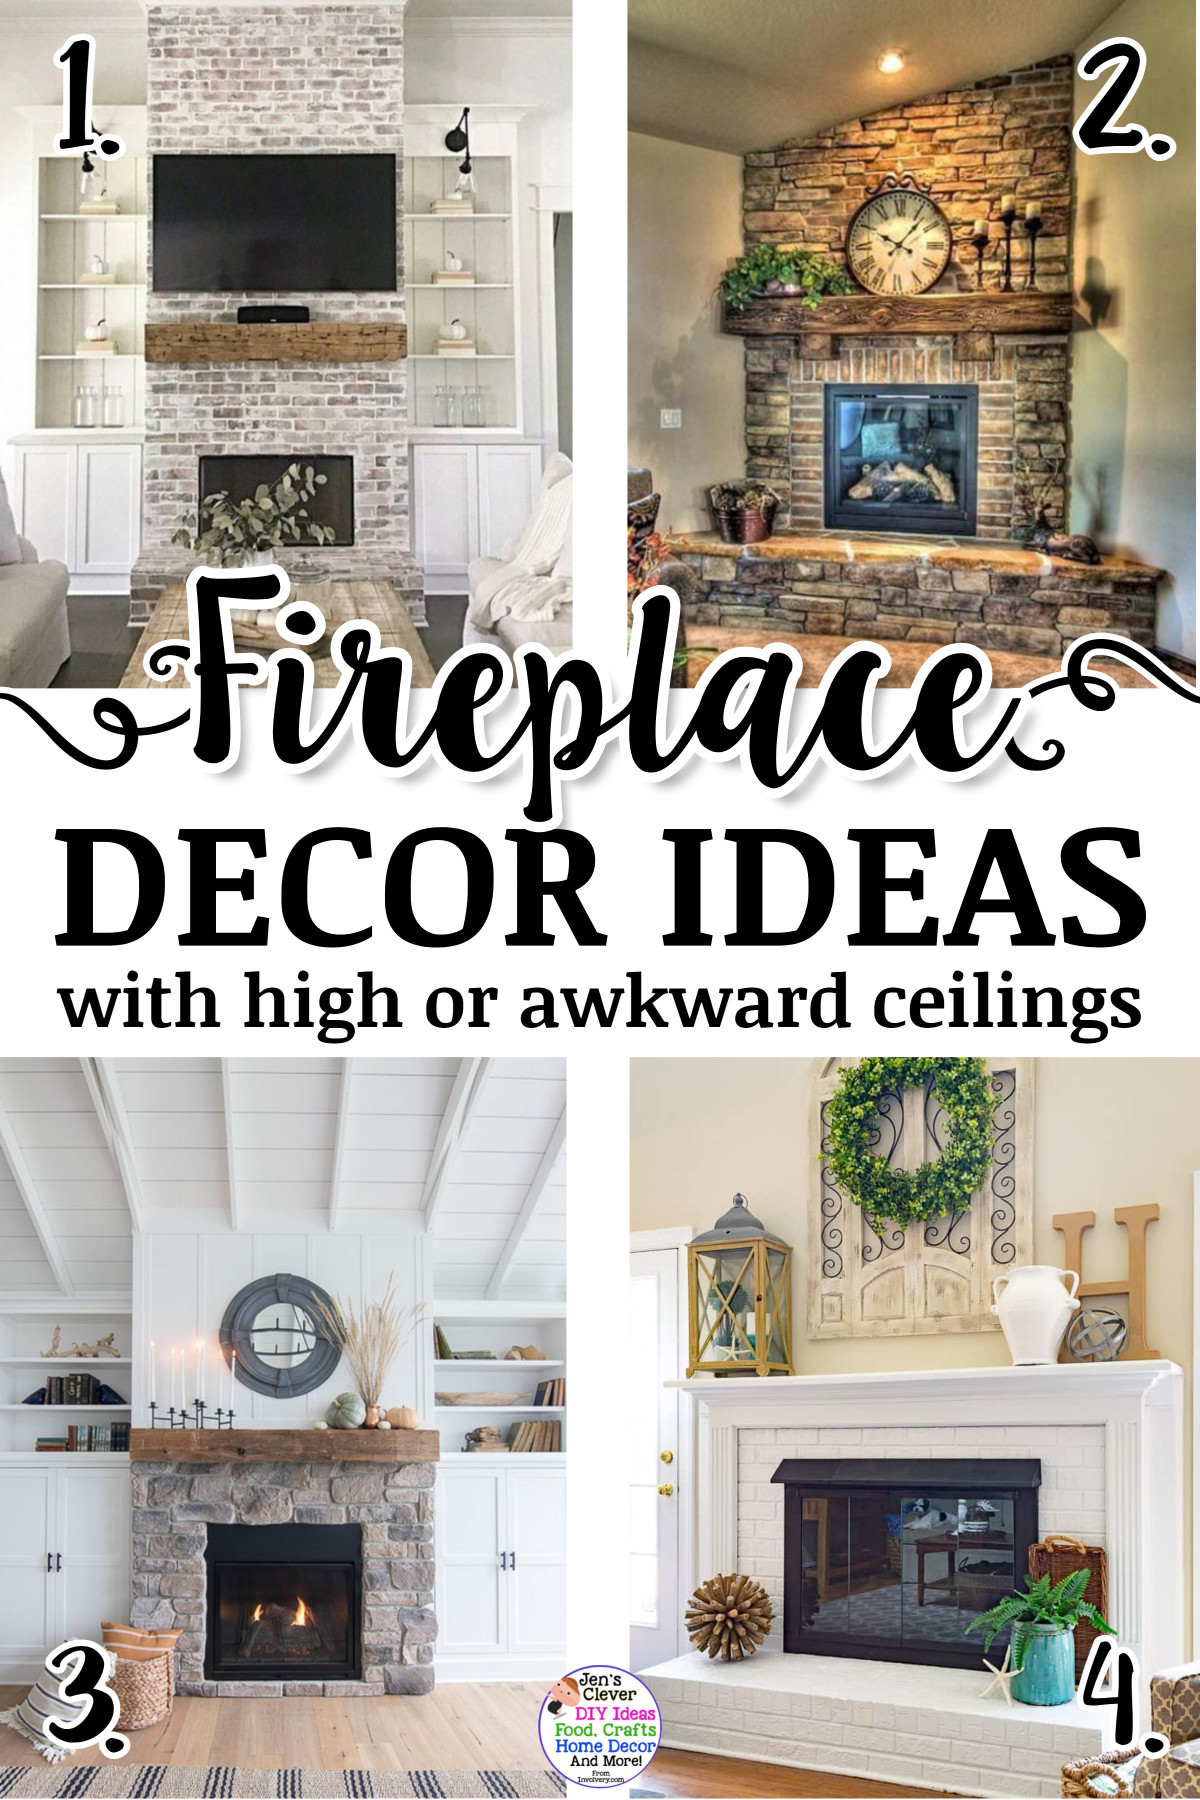 Fireplace decor ideas with high or awkward ceilings